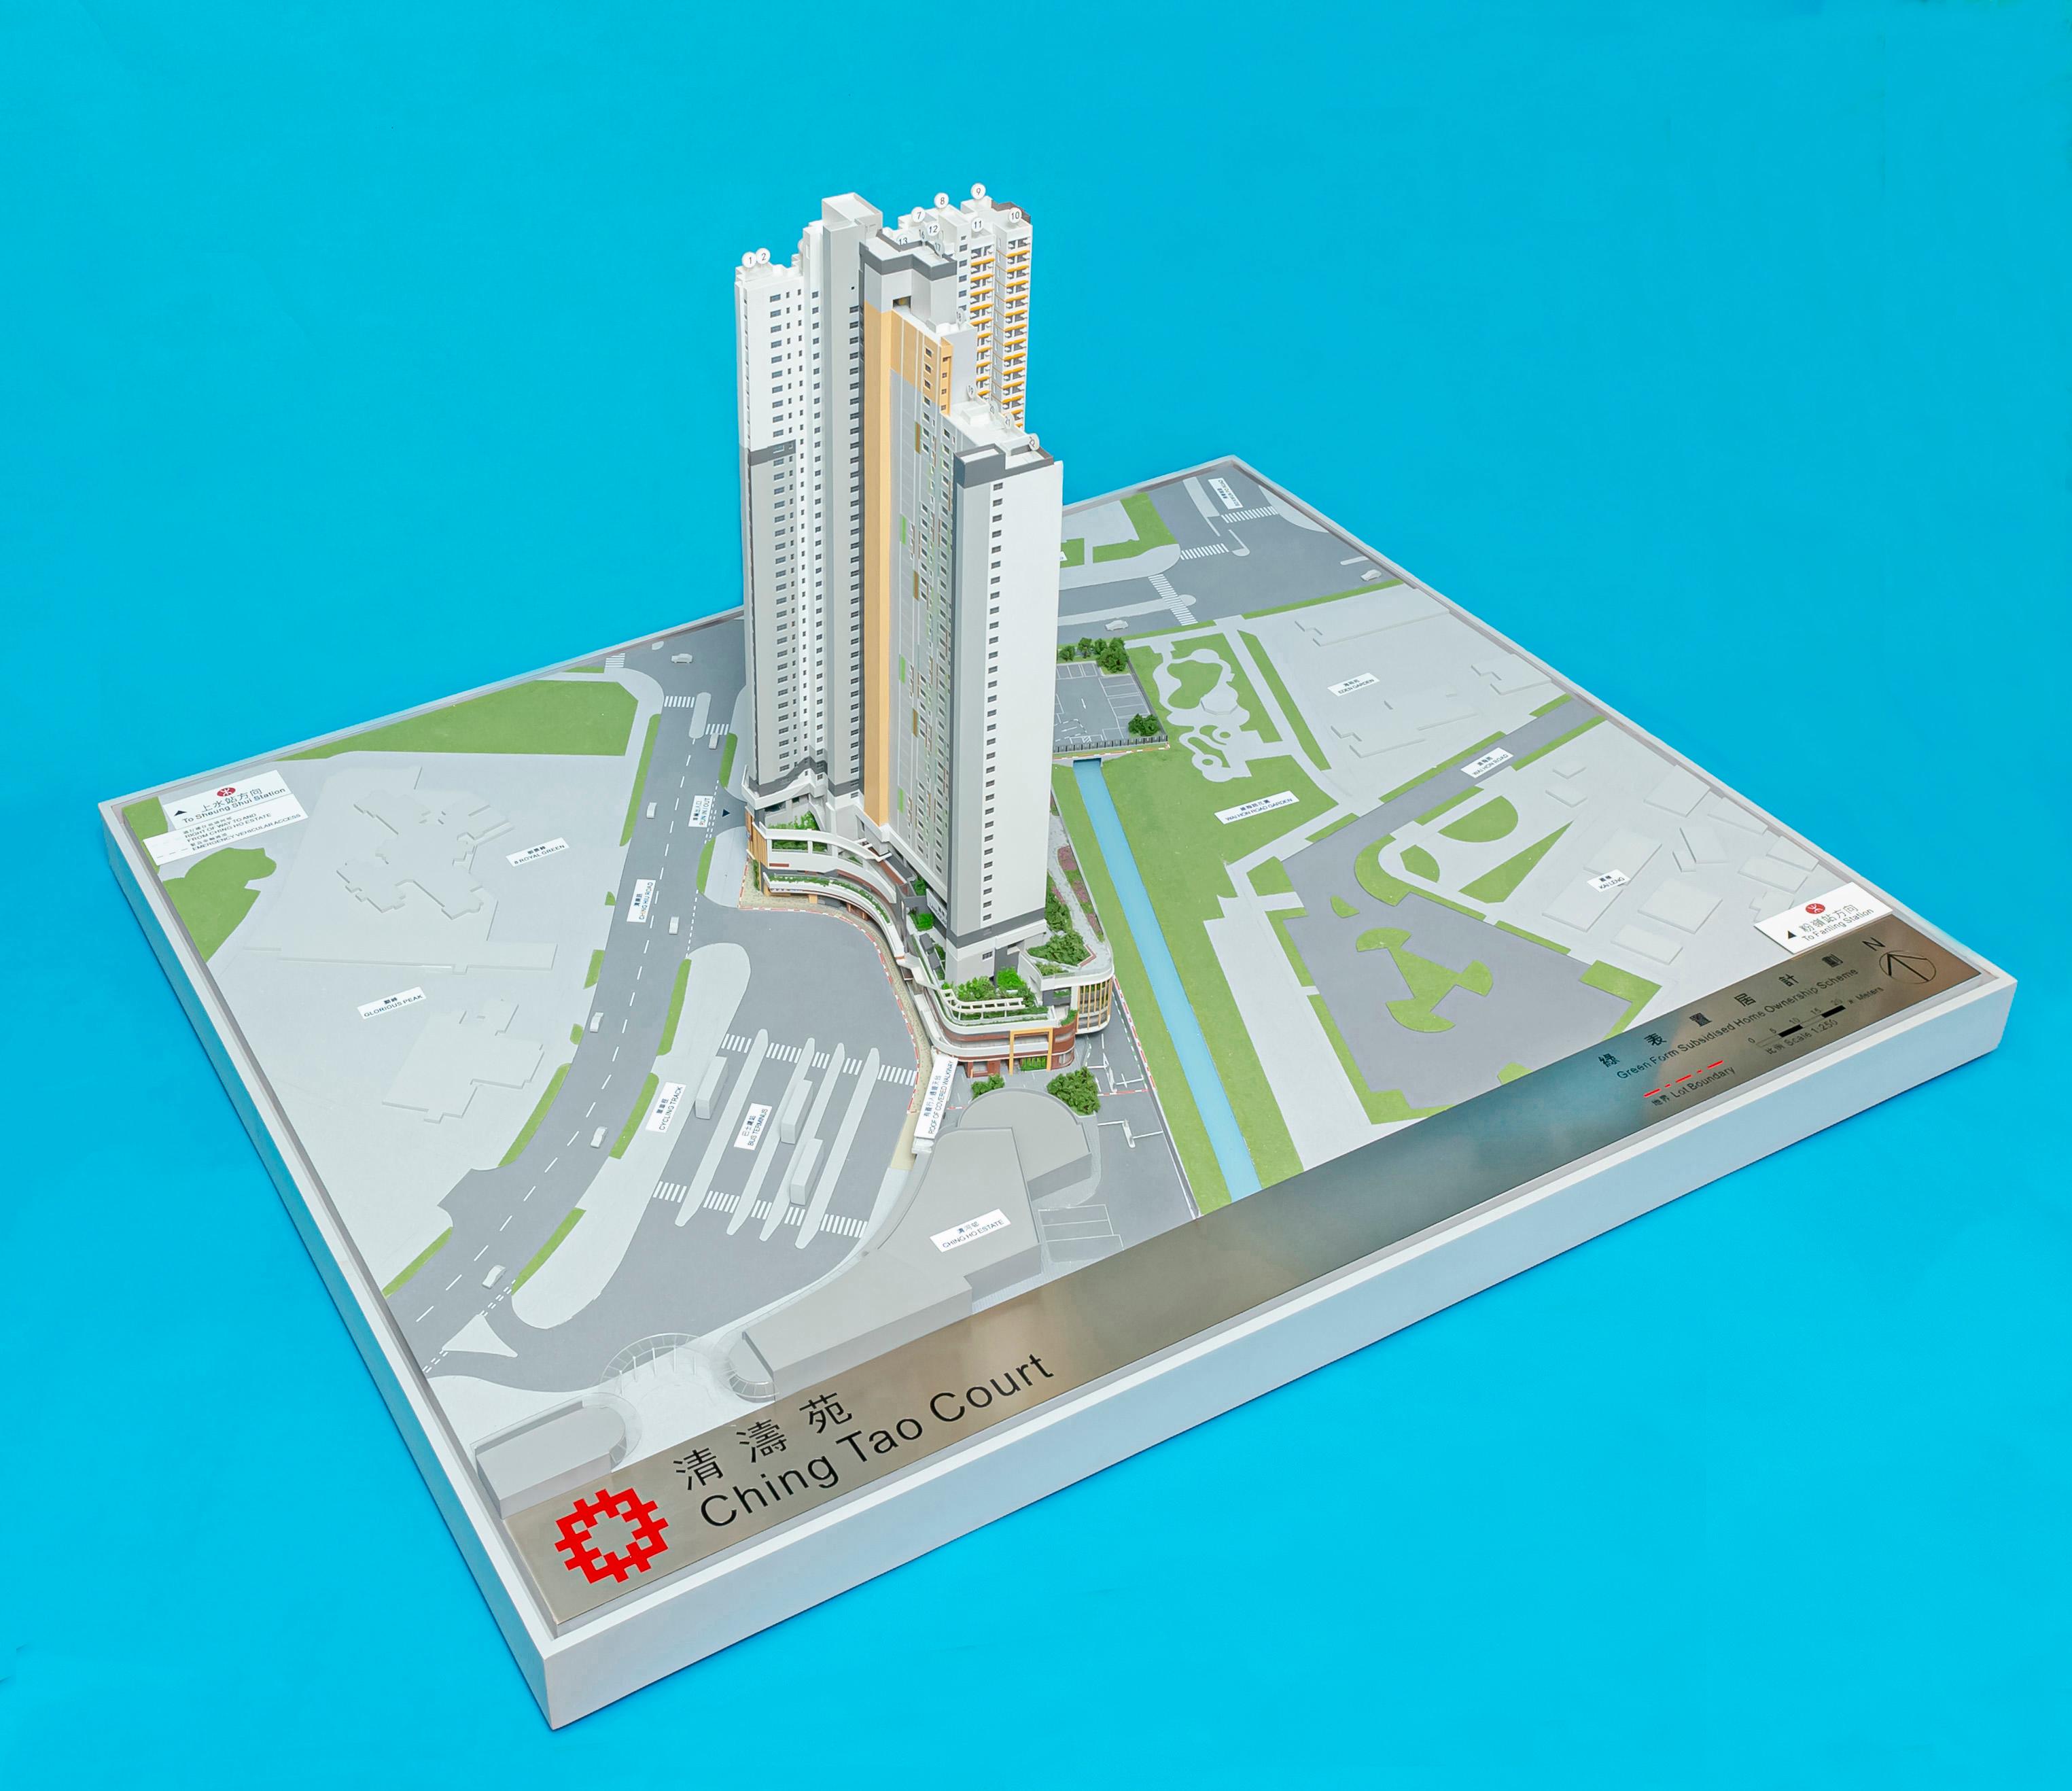 Application for purchase under the Sale of Green Form Subsidised Home Ownership Scheme Flats 2022 will start on September 29. Photo shows a model of Ching Tao Court, a new development project under the scheme.